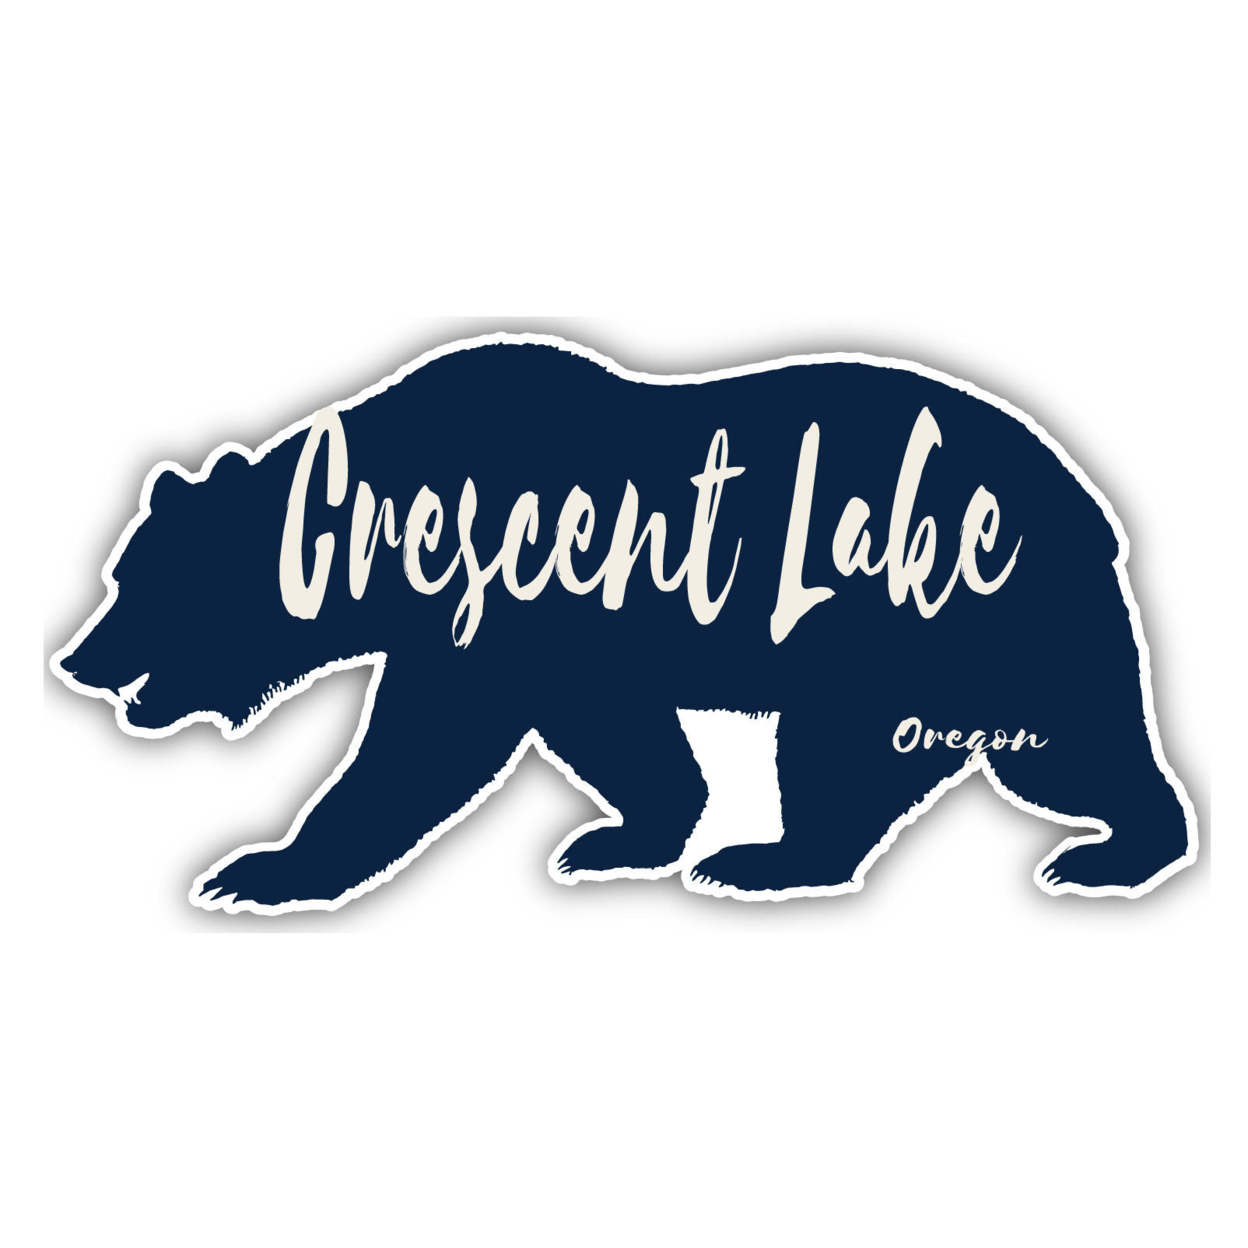 Crescent Lake Oregon Souvenir Decorative Stickers (Choose Theme And Size) - 4-Pack, 2-Inch, Camp Life